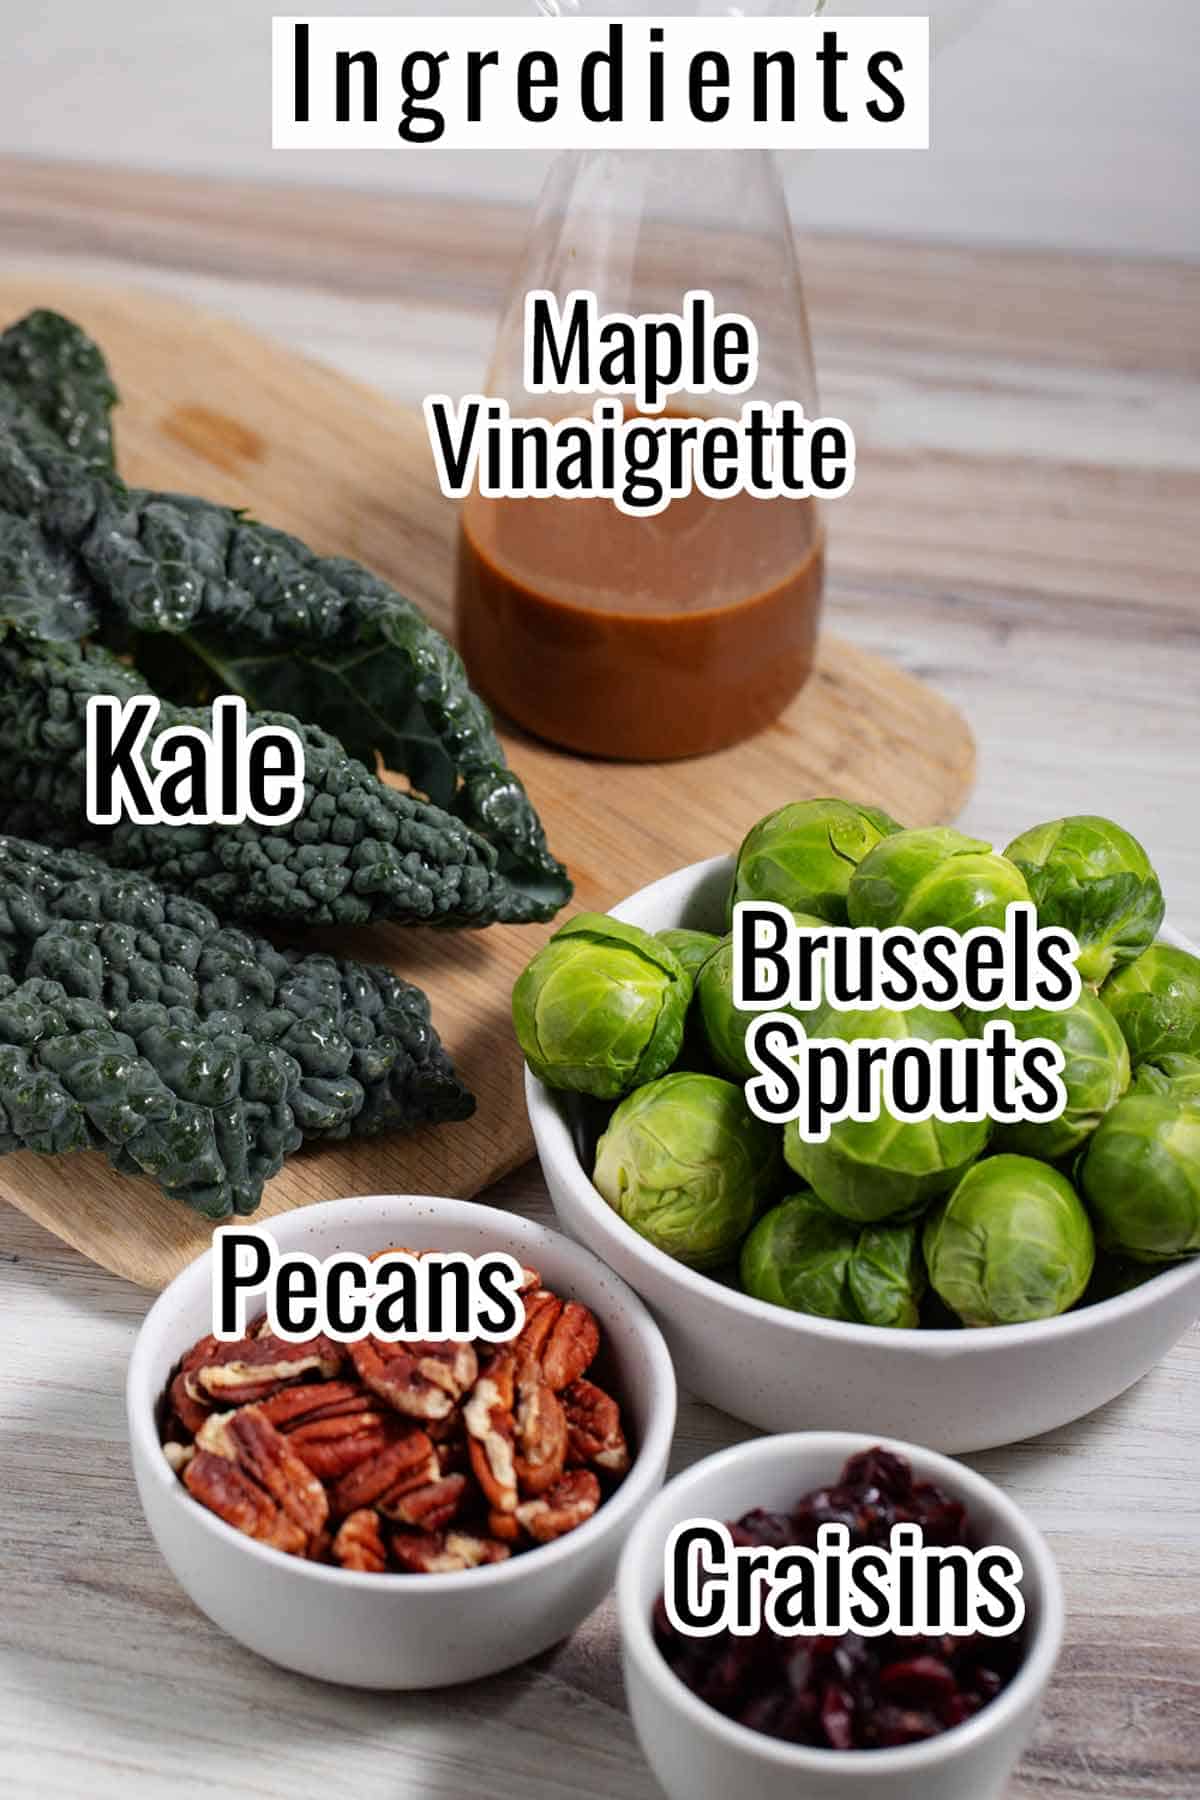 Ingredients for kale and Brussels sprouts salad.